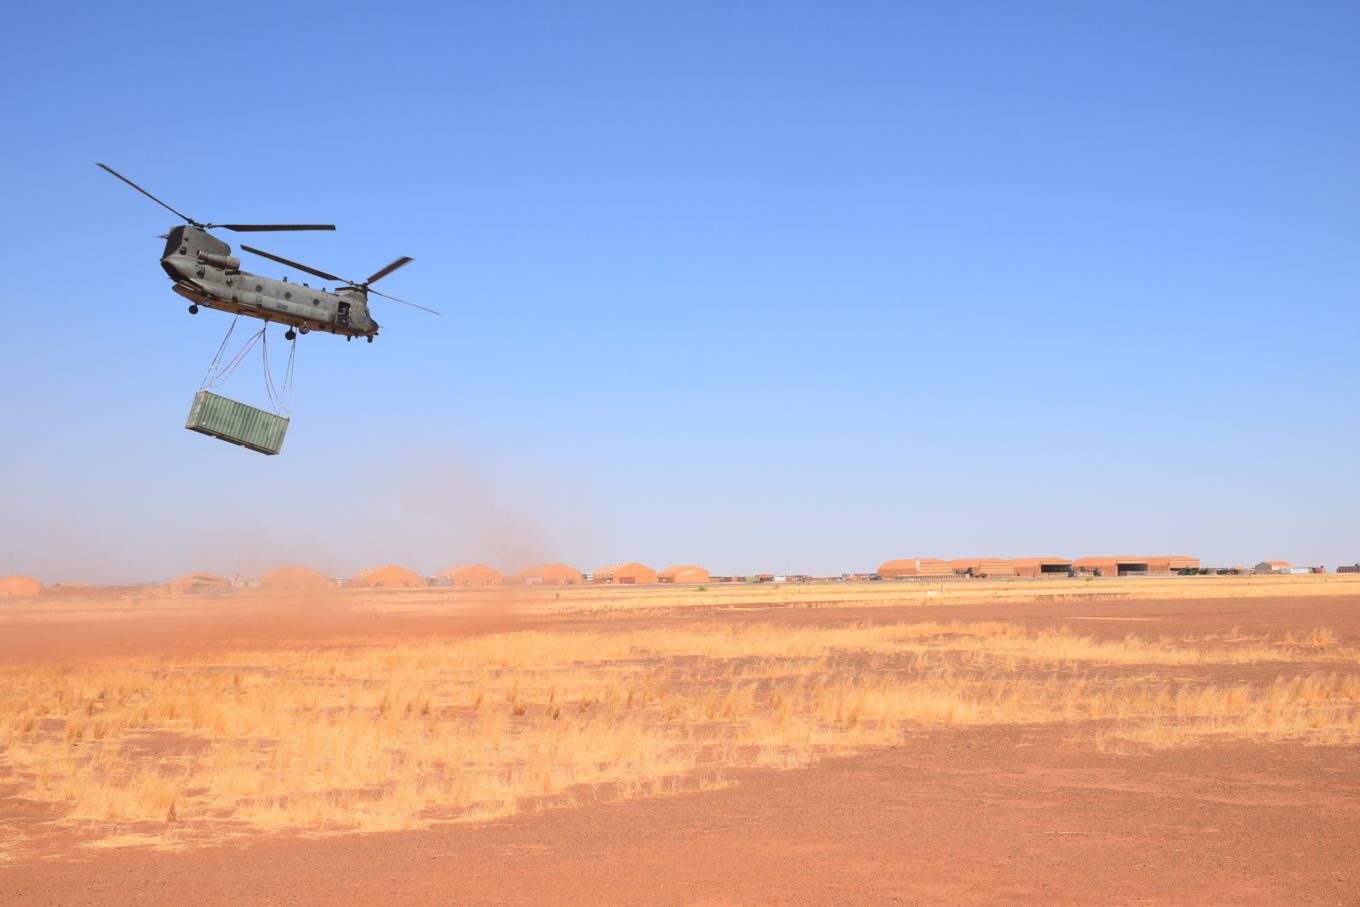 Image shows RAF Chinook in the desert with the container hanging below.